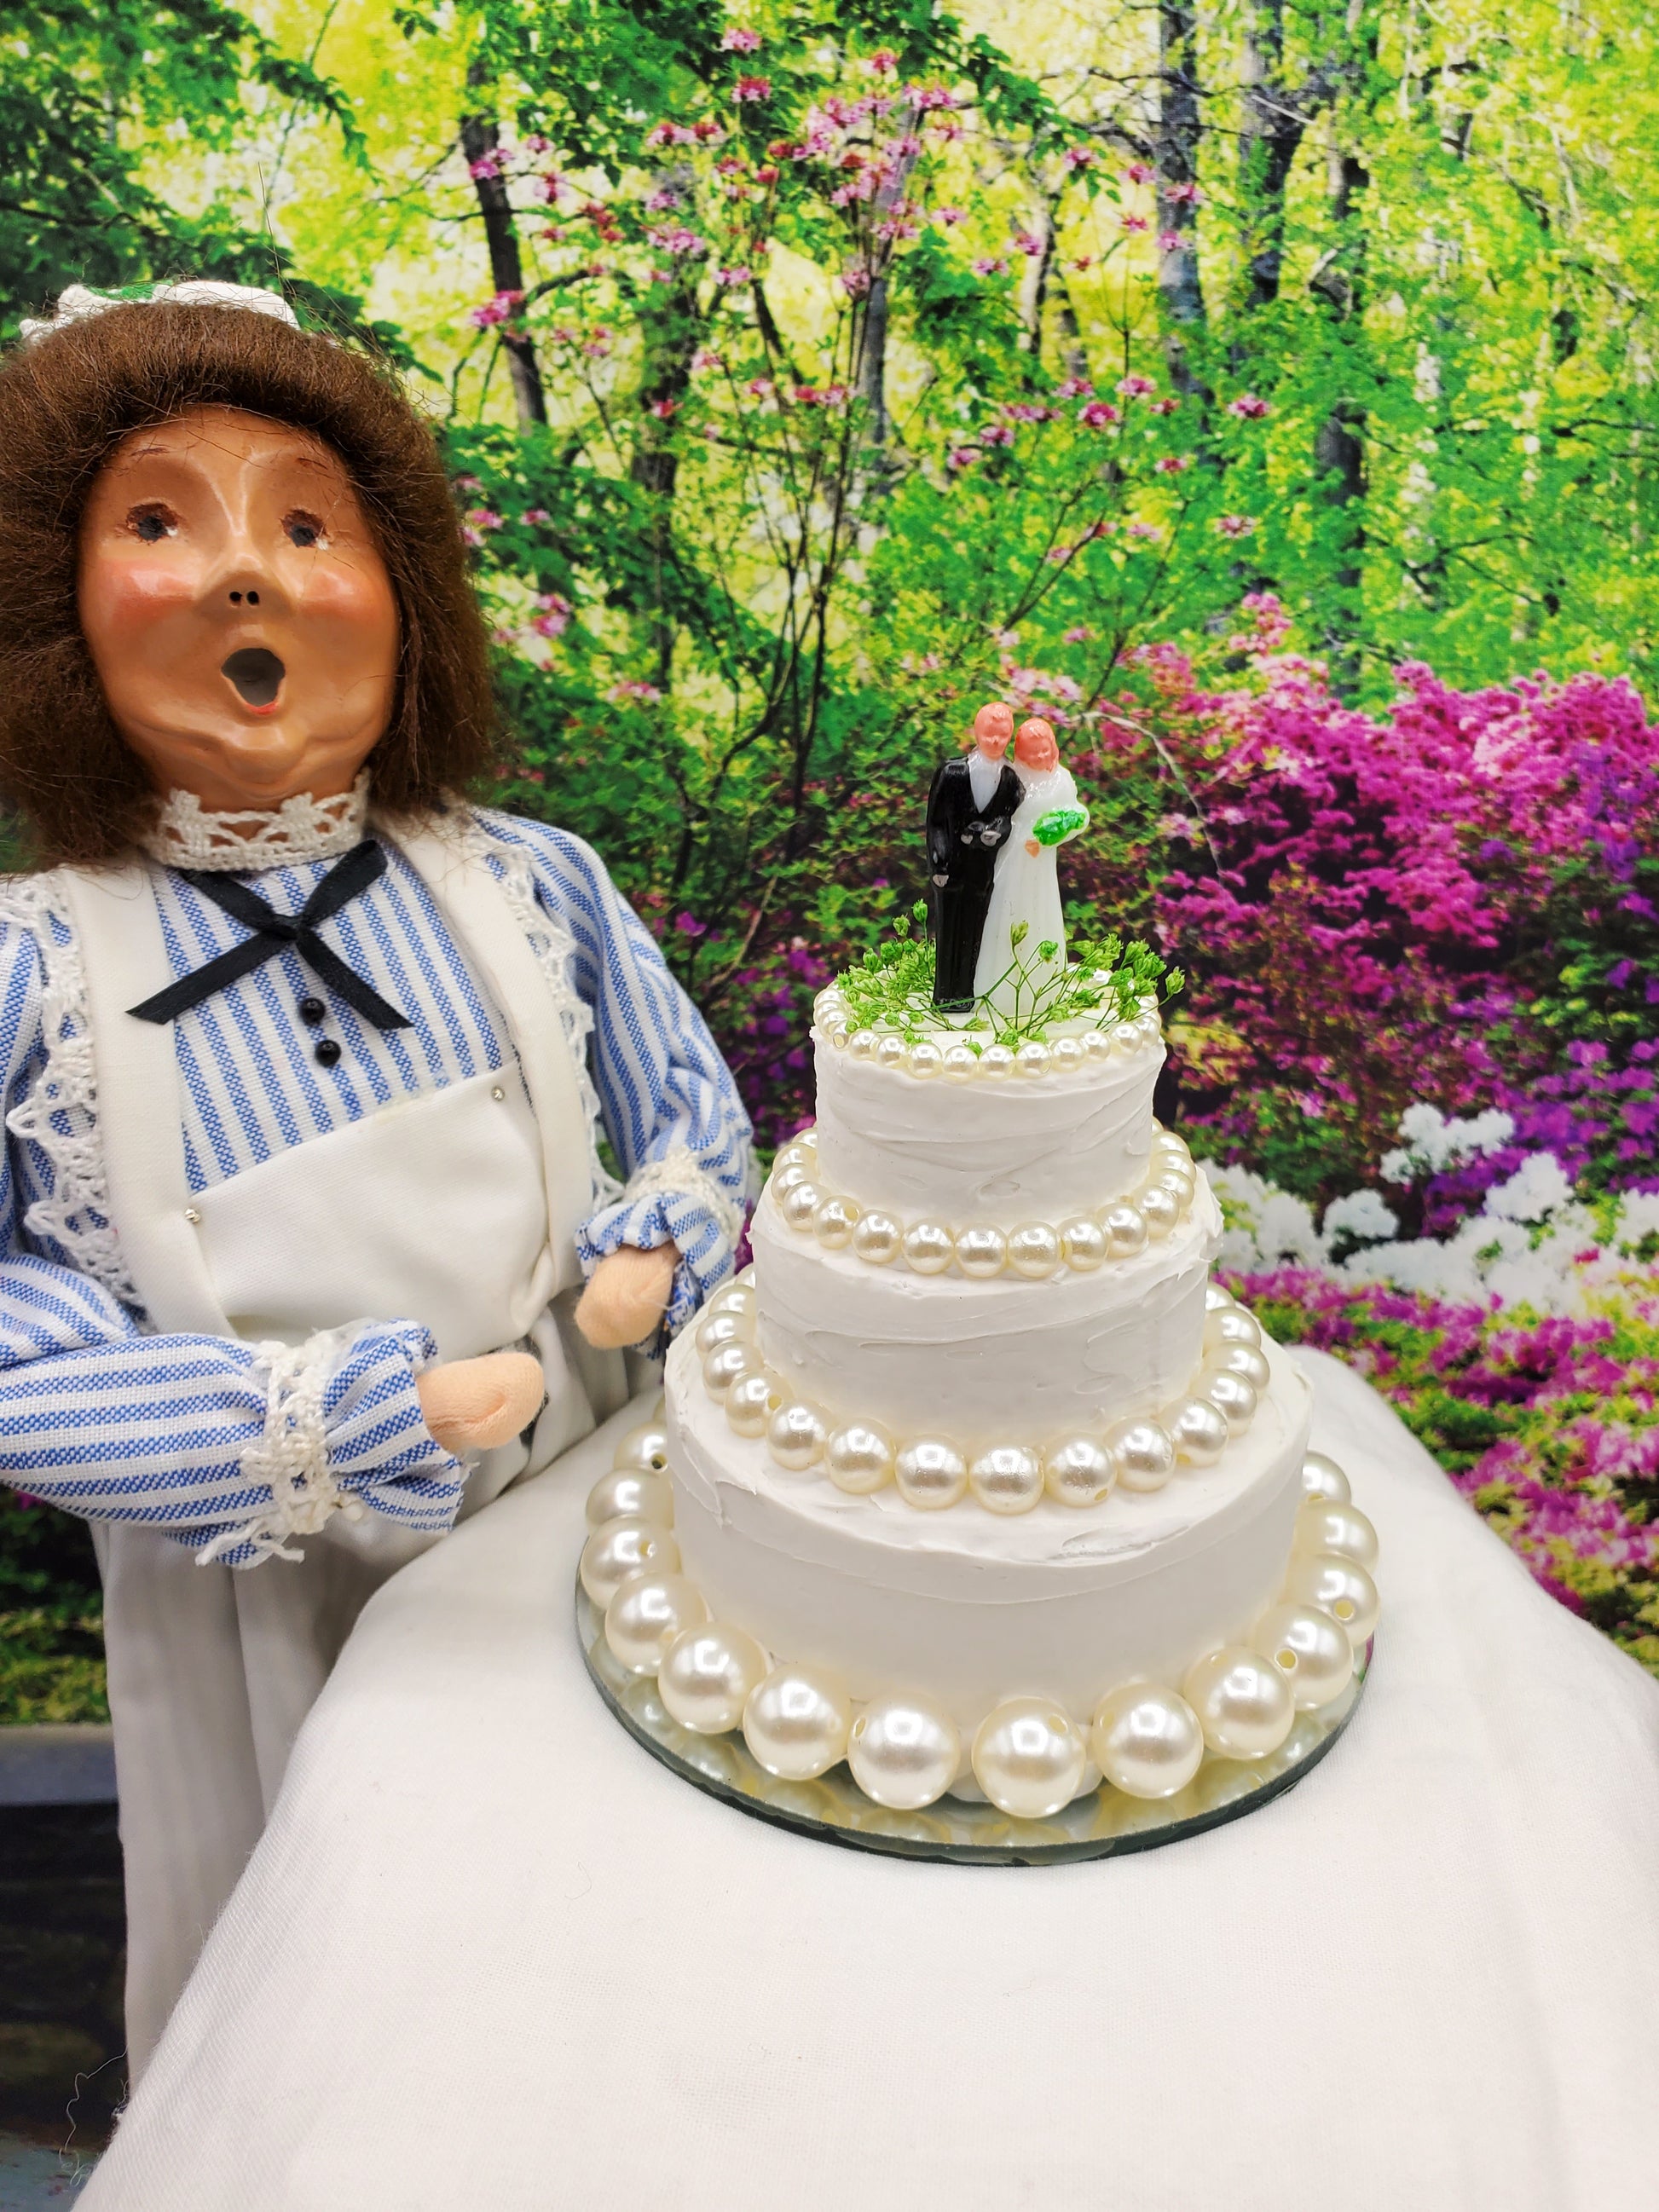 Byers choice doll and wedding cake